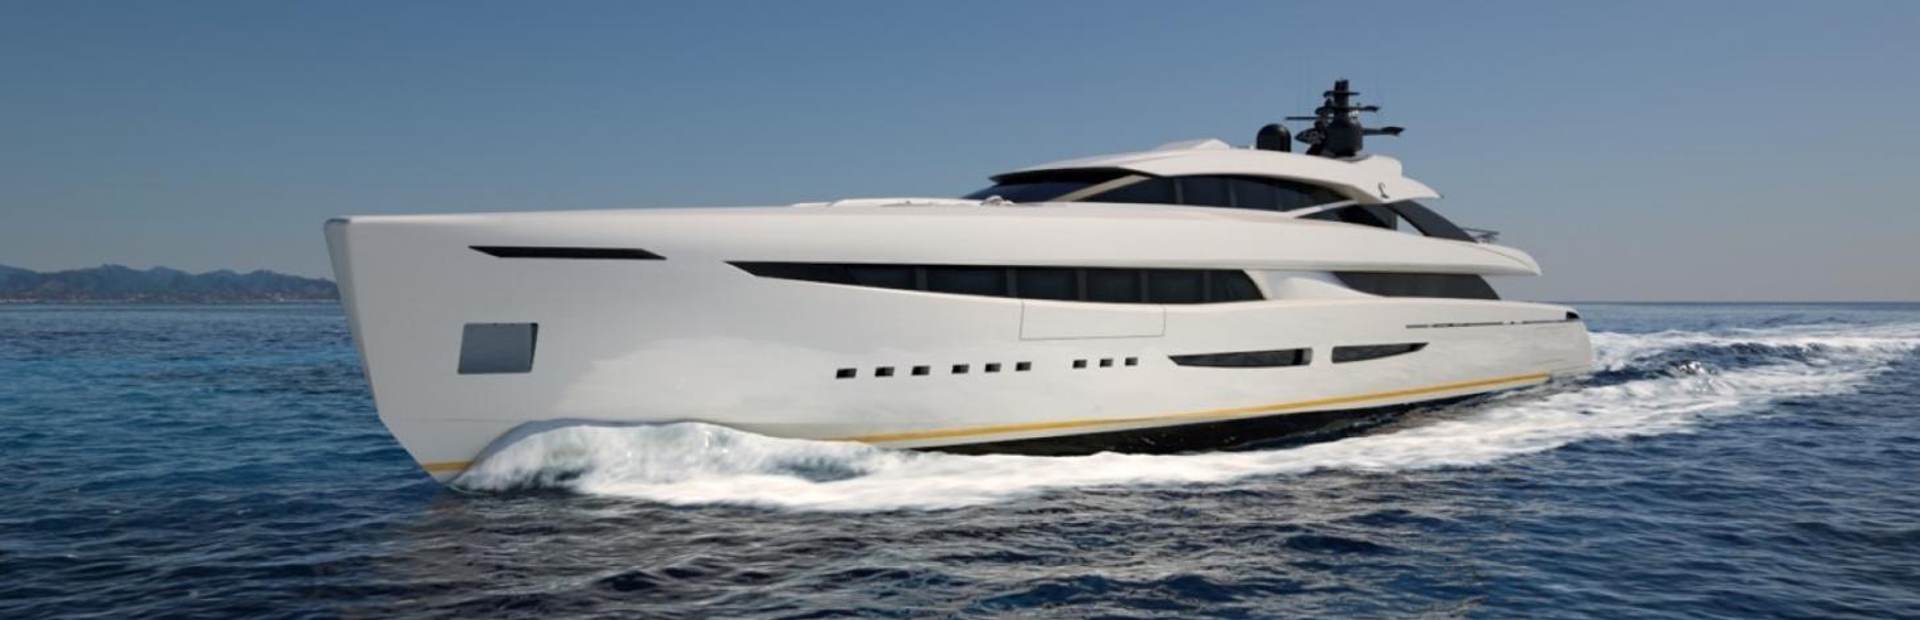 Oceanic Coupe 62M Yacht